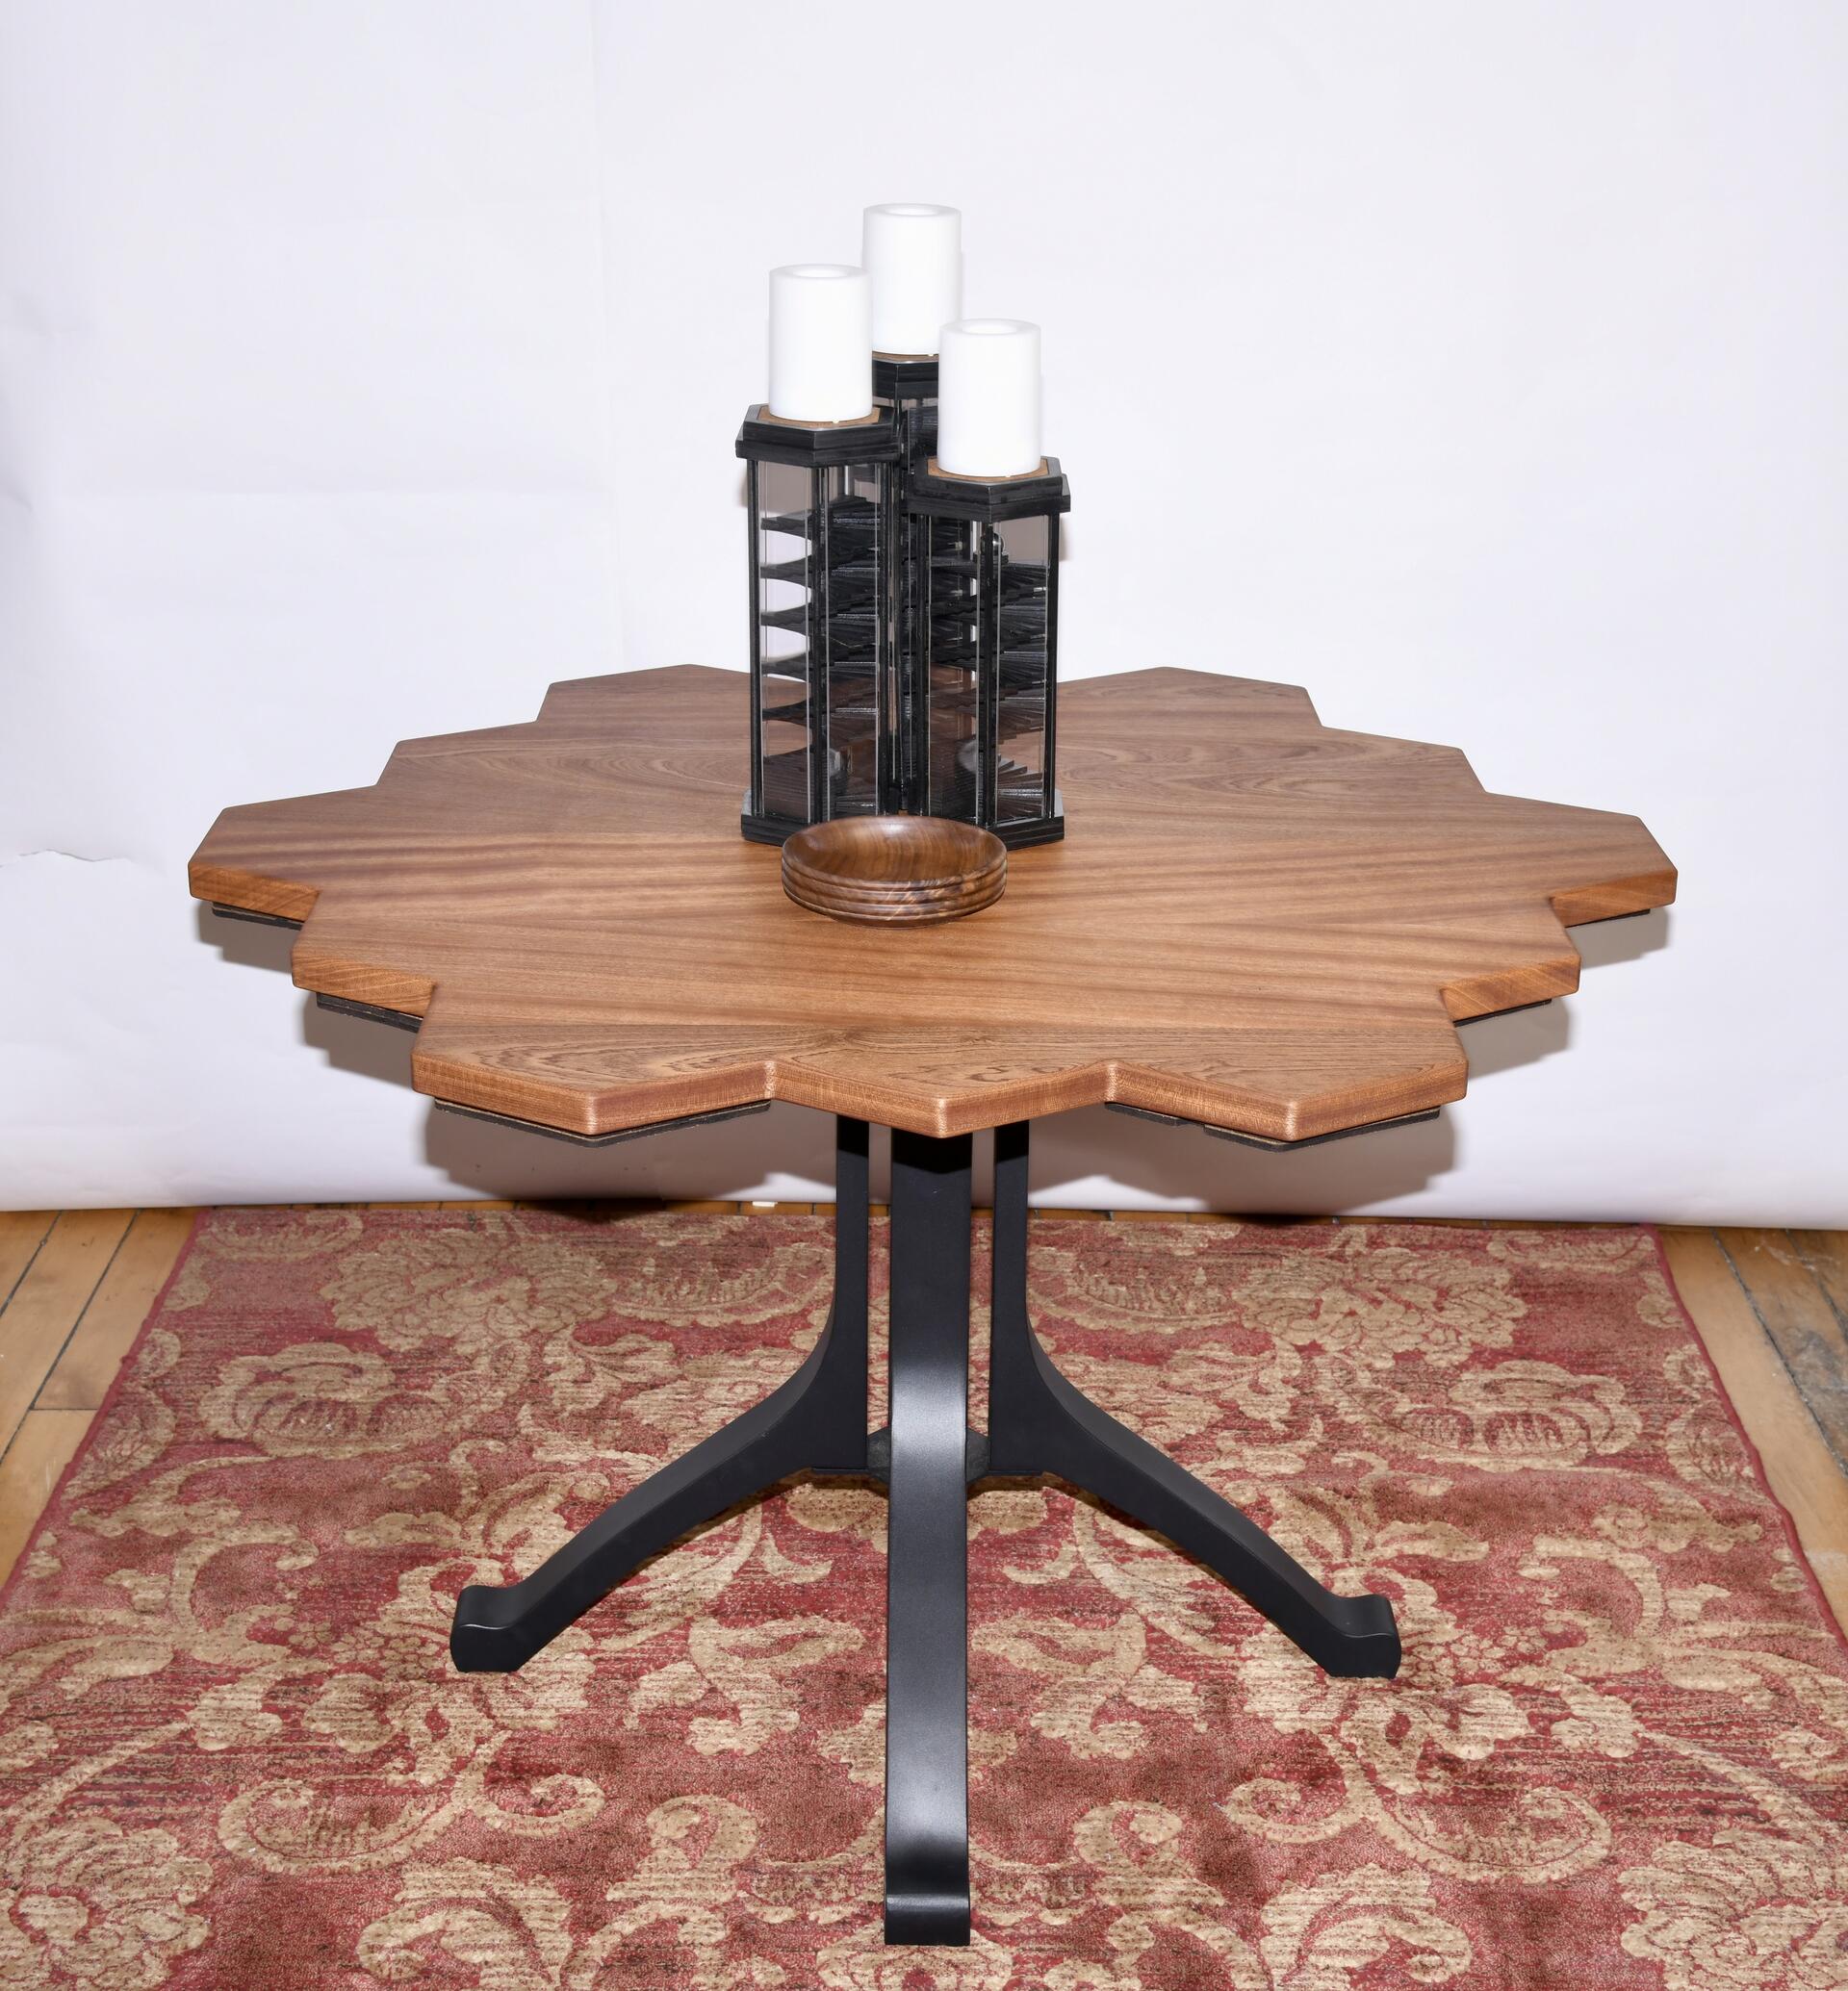 Wood table with three hexagonal candle sticks on top. A bowl on the hexagonal table. Woodeb table top metal legs. Honeycomb table shape.